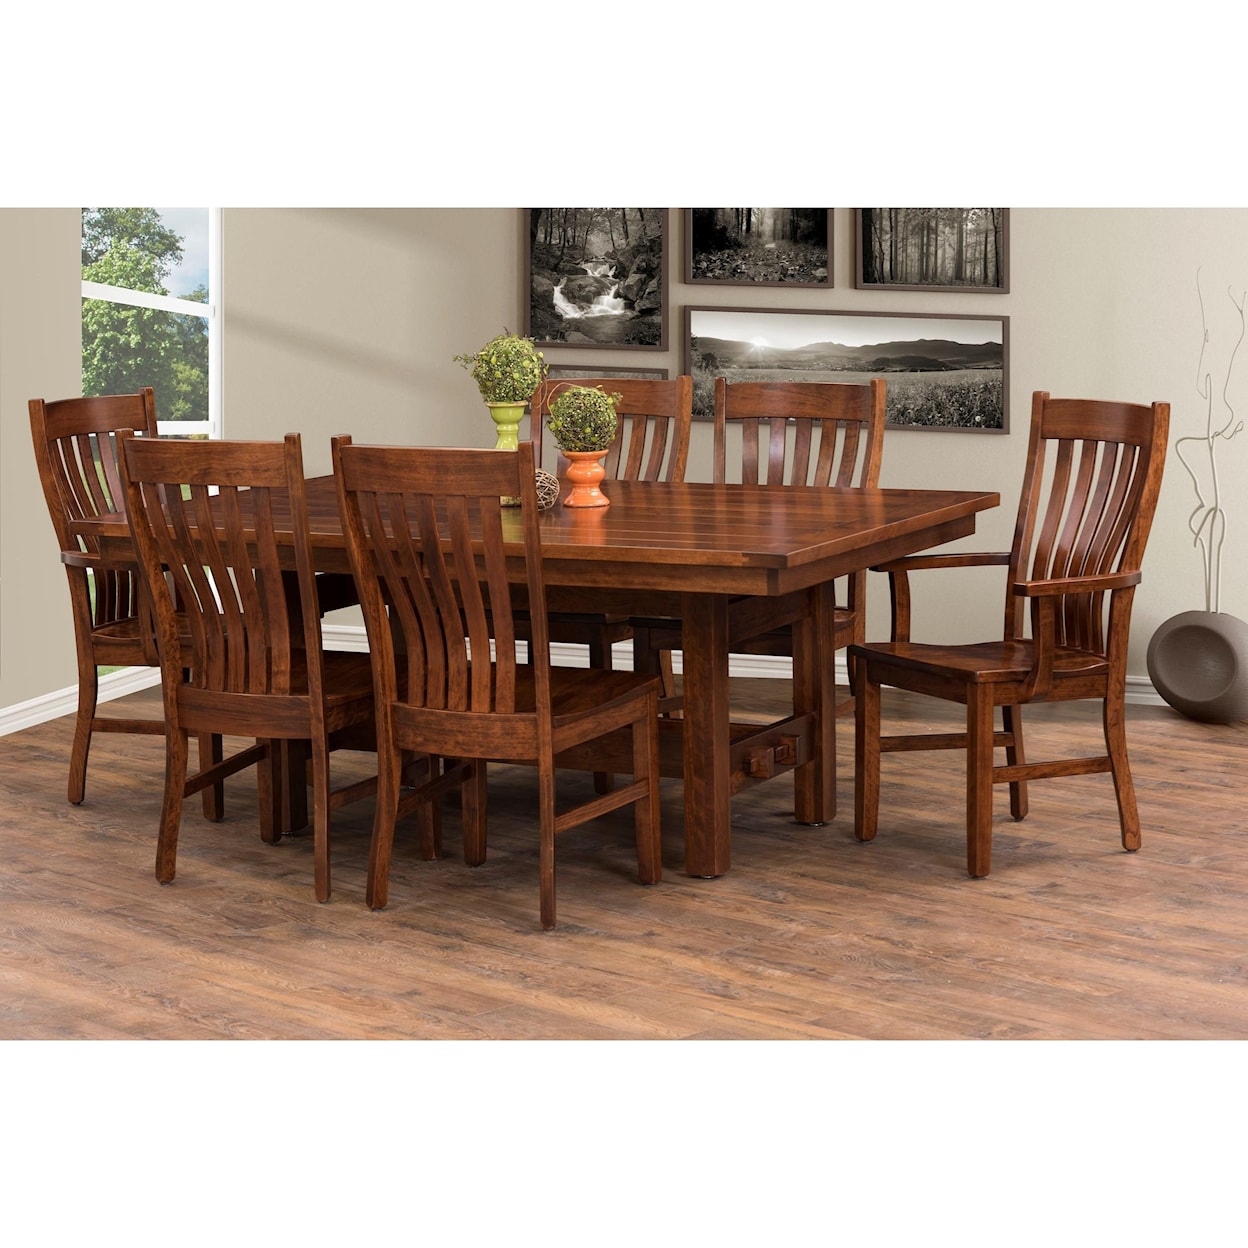 Trailway Amish Wood Sutter Mills 48 x 72" Dining Table